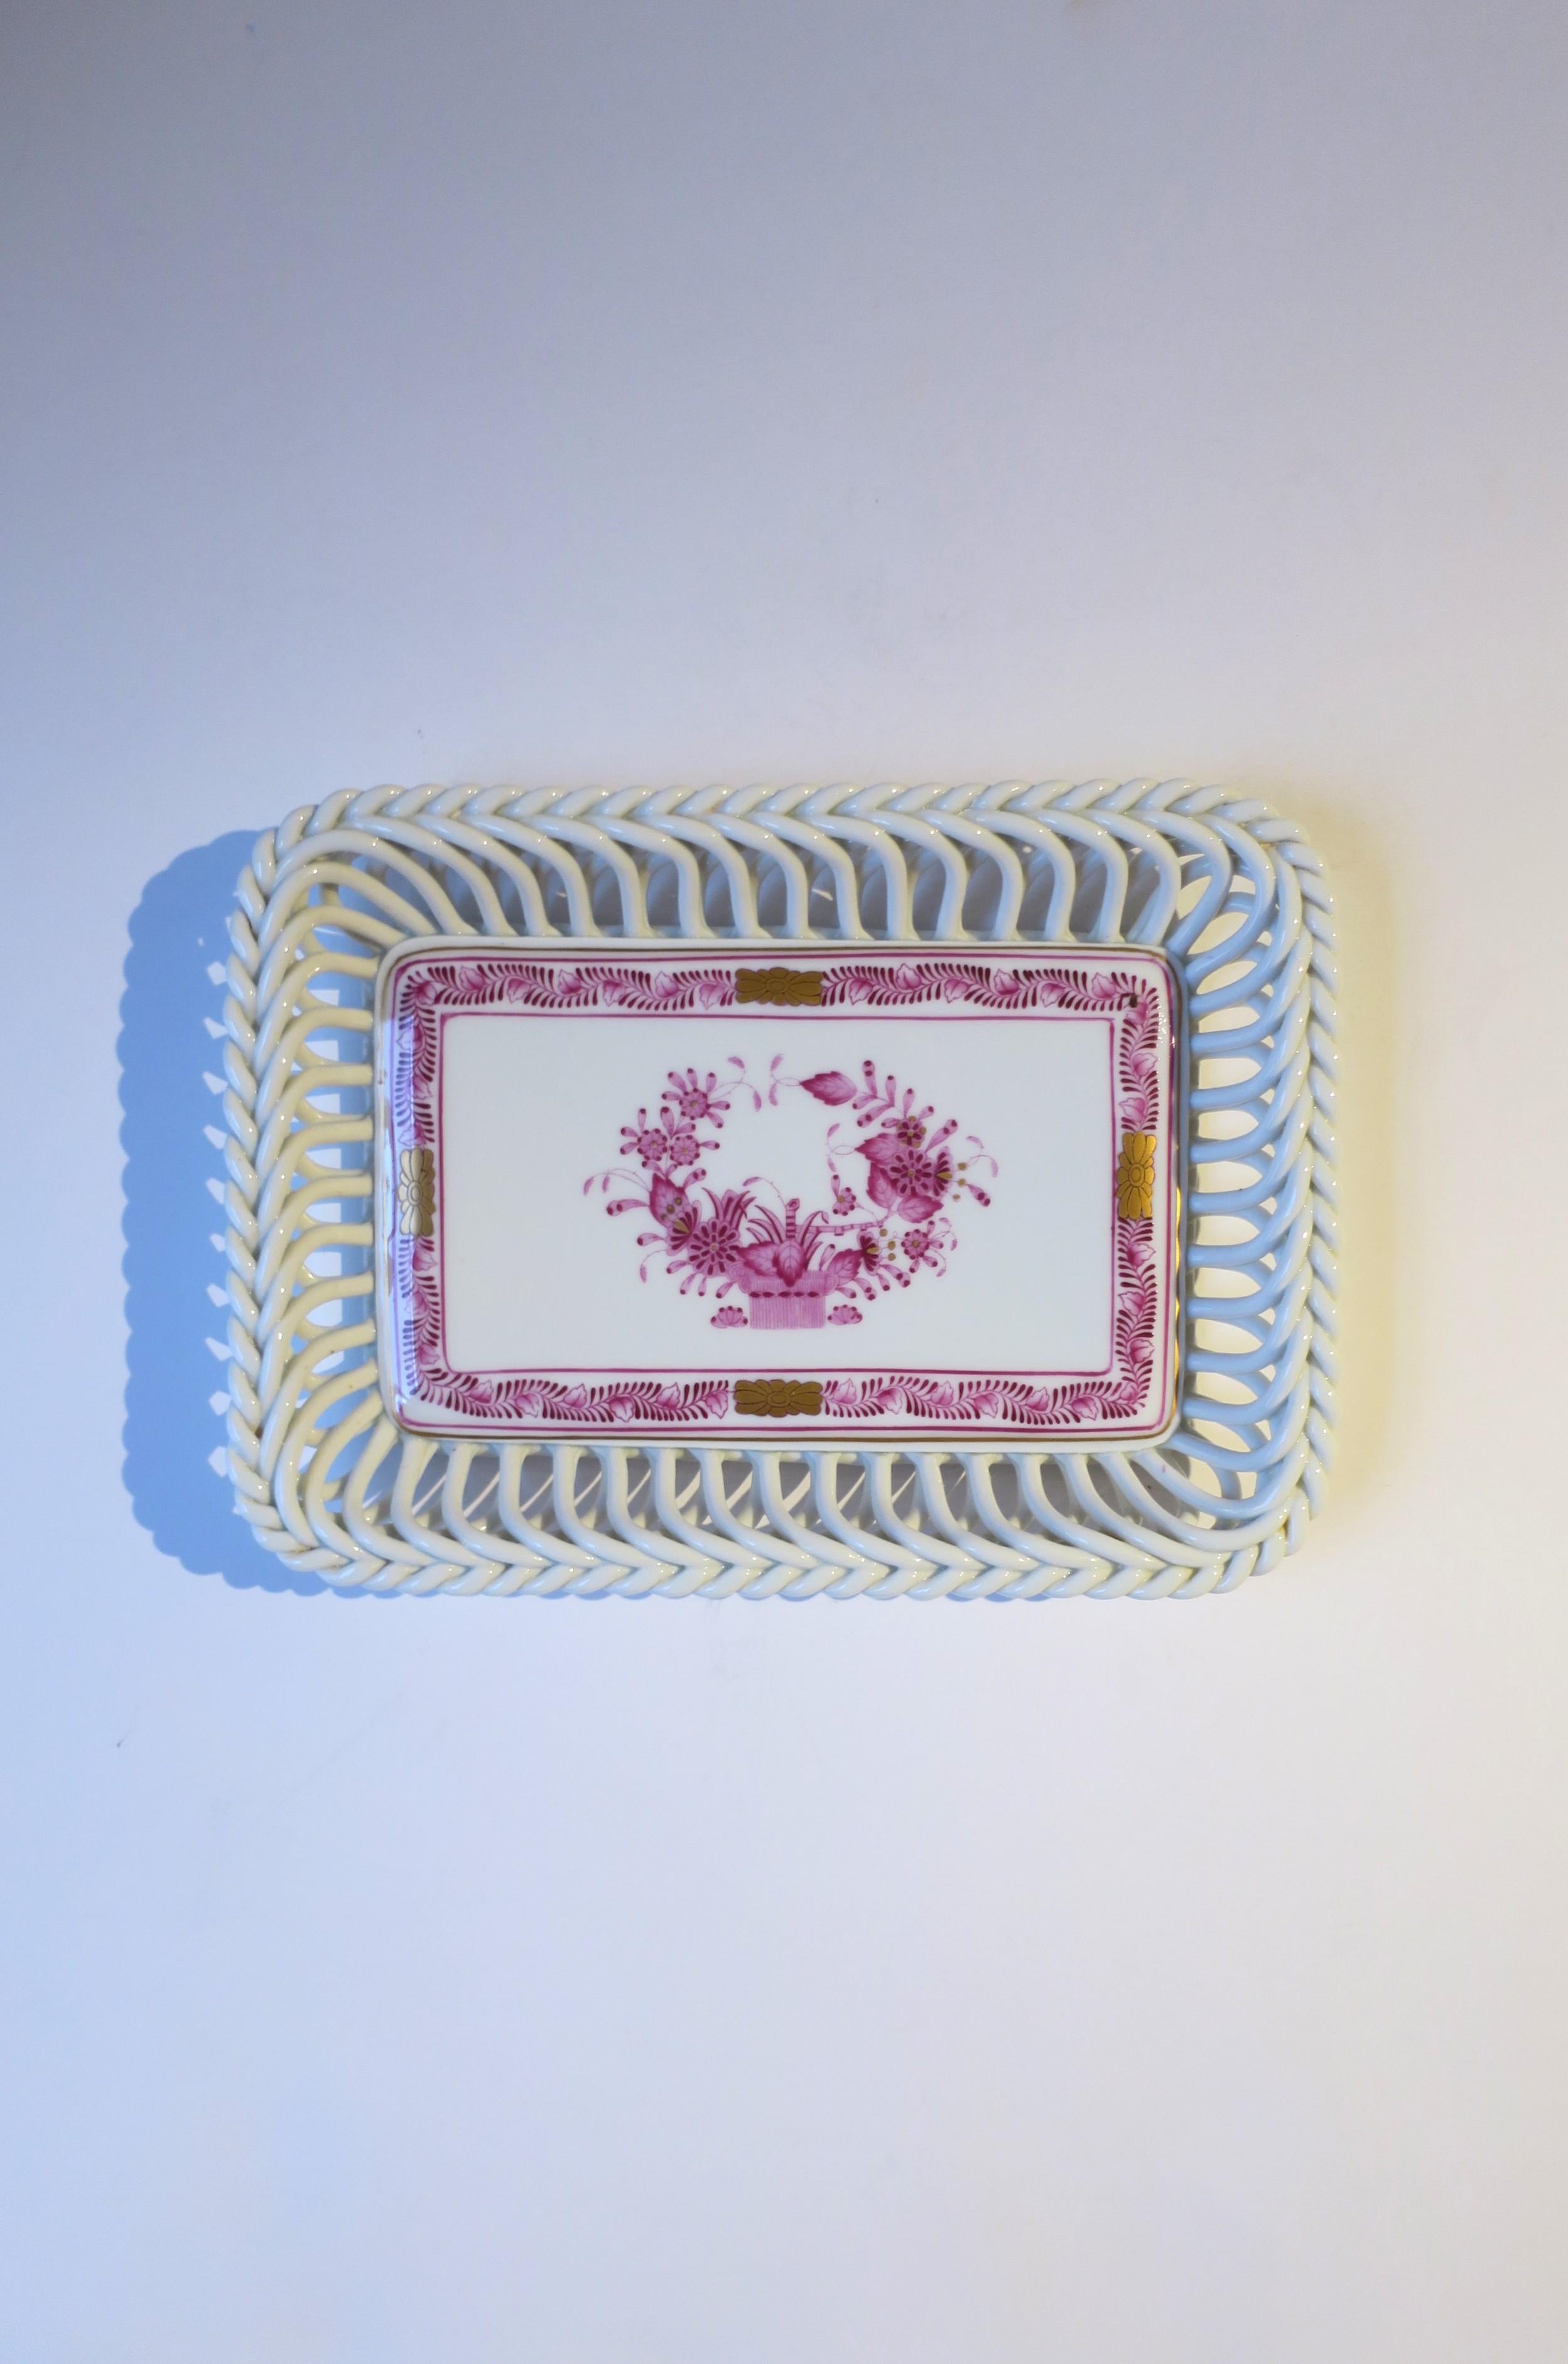 A beautiful white porcelain tray dish vide-poche by luxury marker Herend, circa 20th century, Hungary. This rectangular porcelain tray has a latticework open design, braided edge, and a magenta pink and gold detail around inside edge and center. A